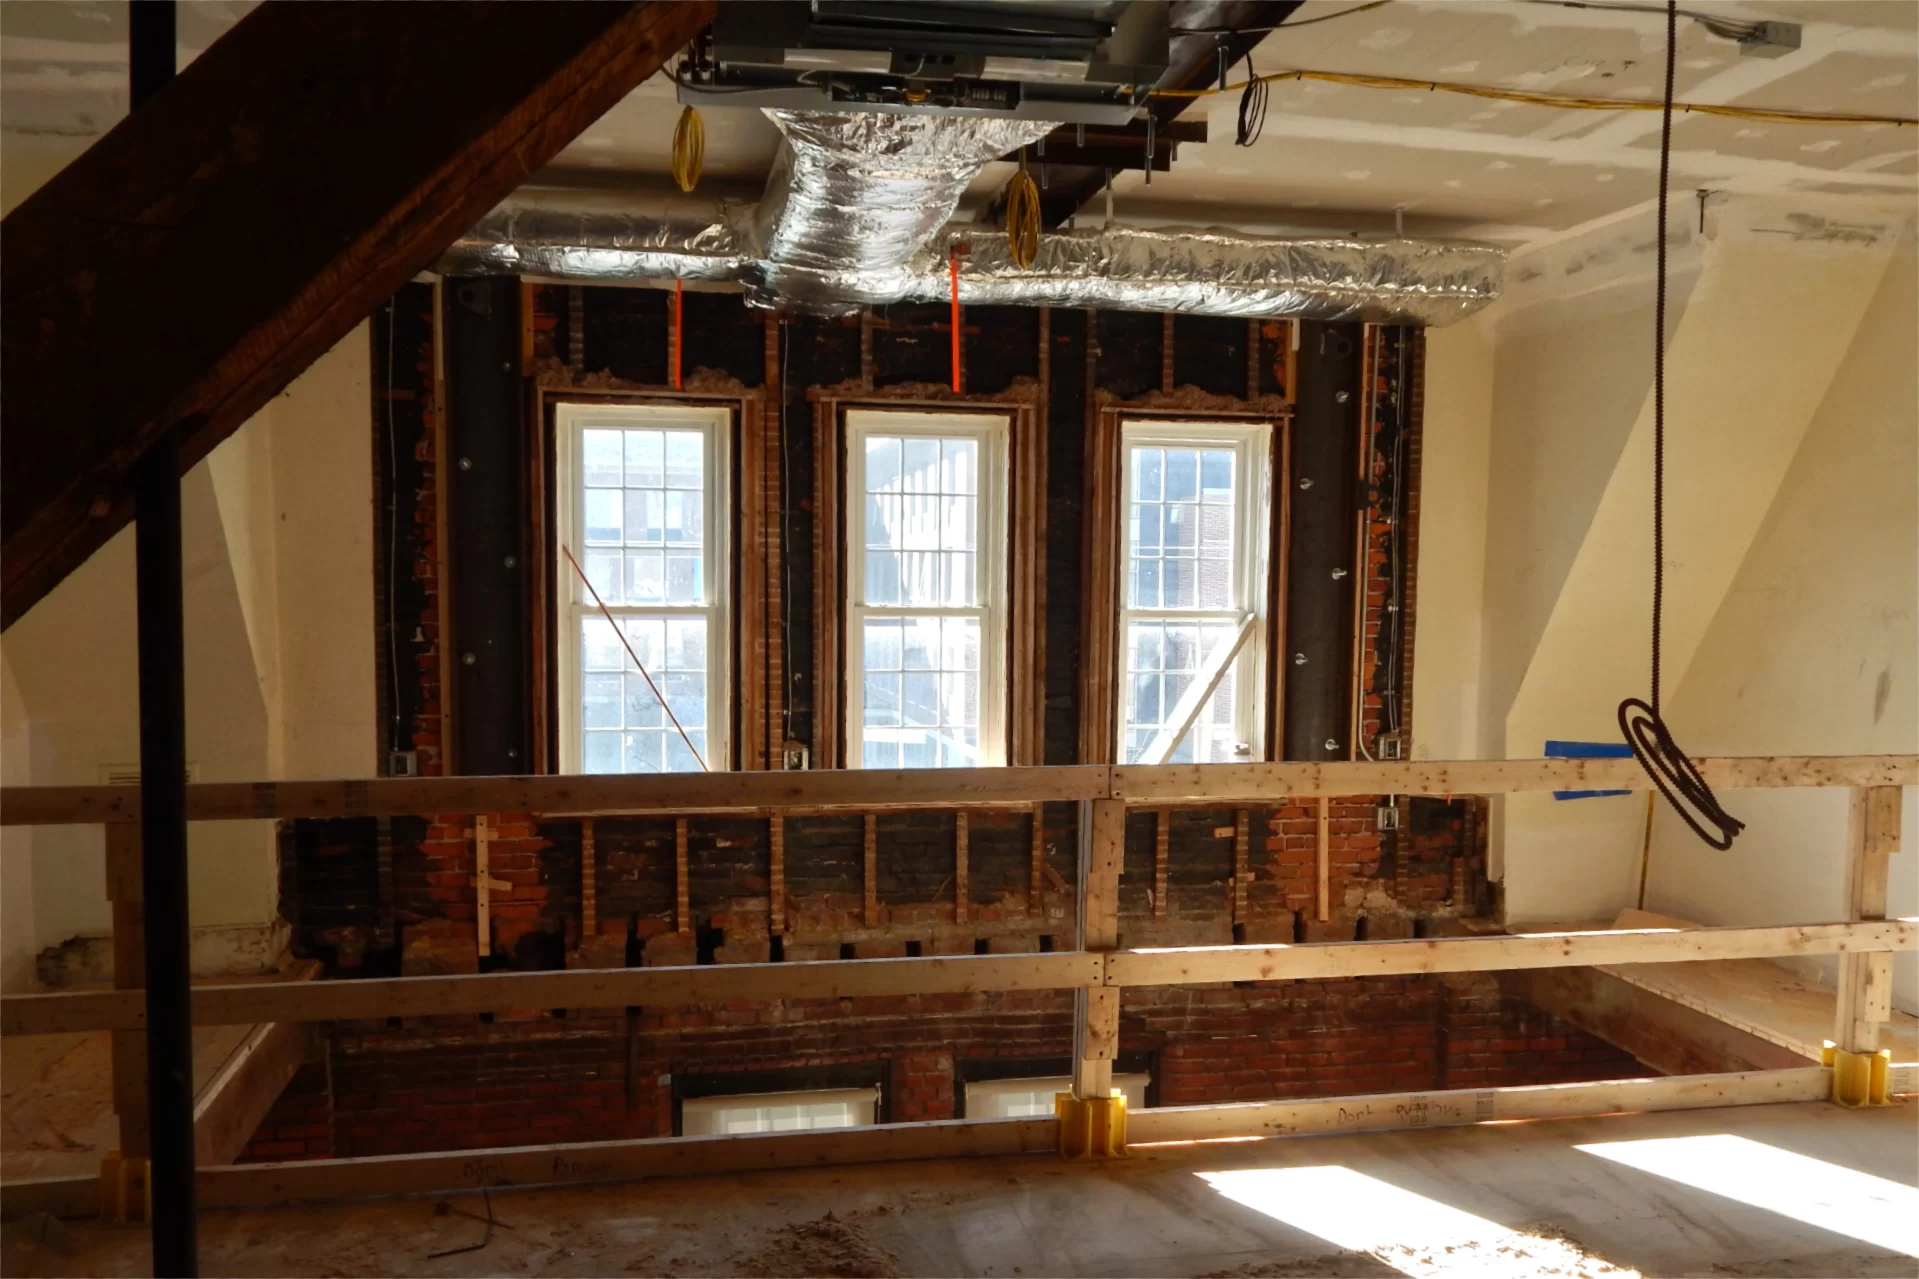 The opening in the floor of this room on Chase Hall’s second story is temporary. The floor was removed because old water damage. After repairs to the brick wall under the windows, the existing flooring will be extended to the wall again. Doug Hubley/Bates College)